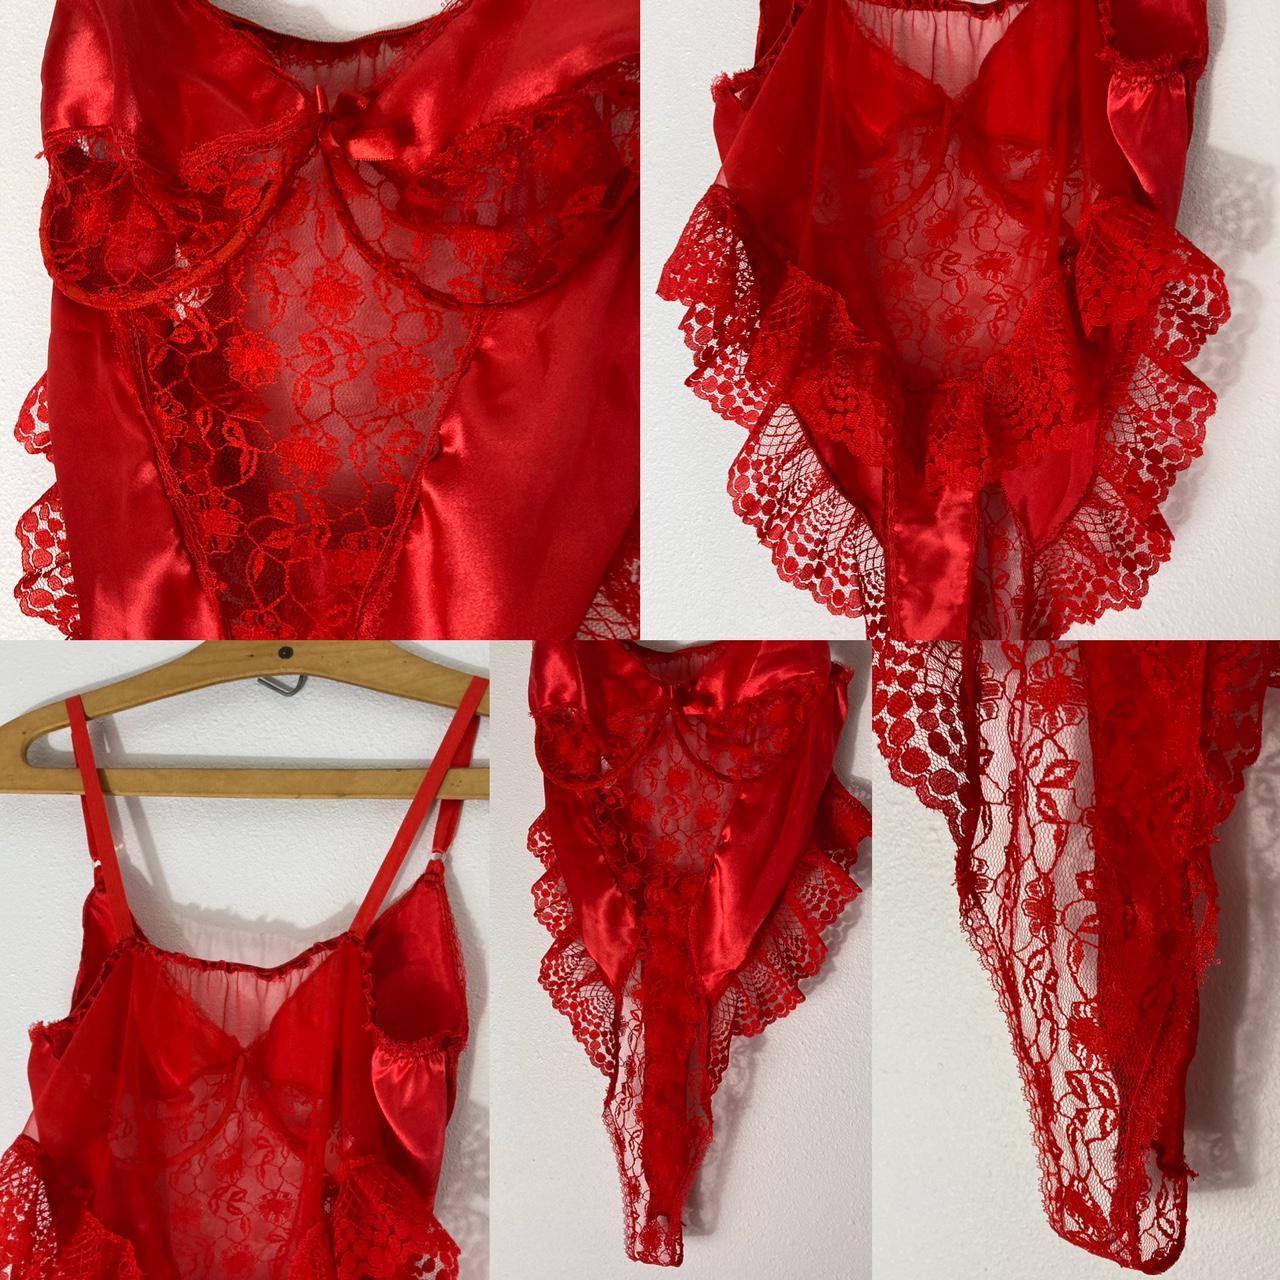 Product Image 2 - Vintage style high waisted red